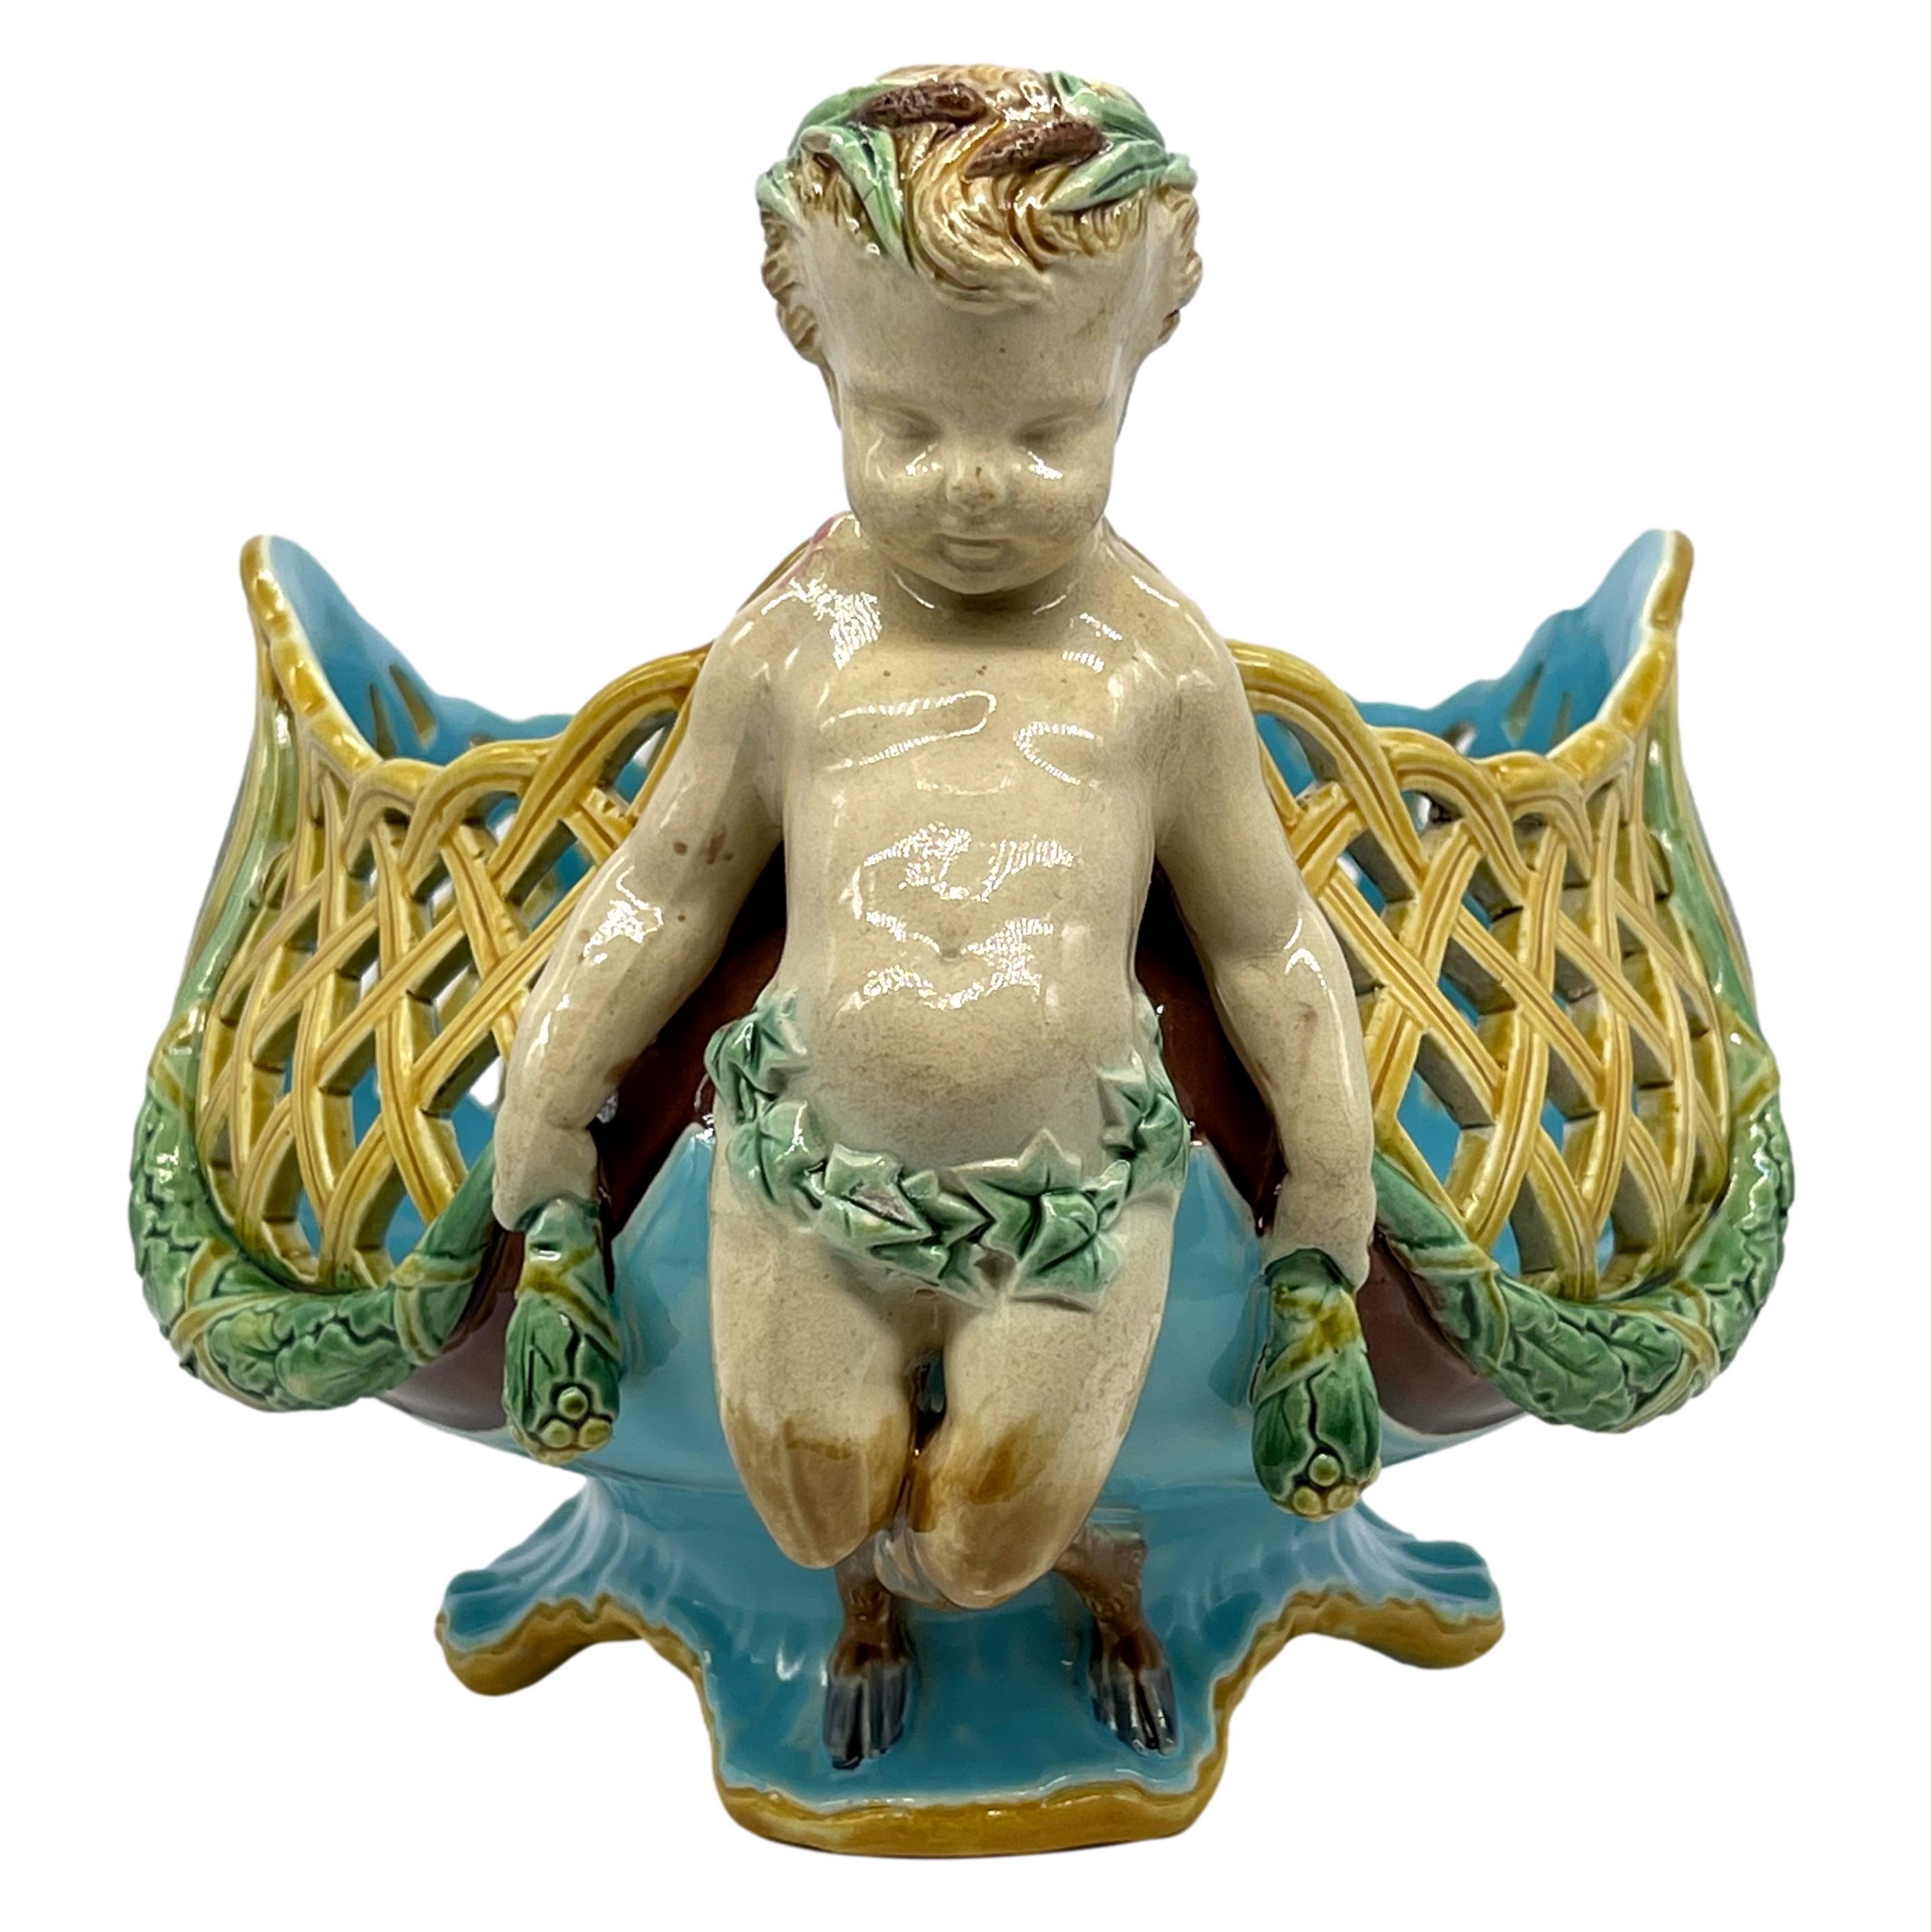 Minton Majolica Reticulated Basket Designed by Albert-Ernest Carrier-Belleuse, the lozenge-shaped body with reticulated lattice with oak garlands and oval cartouches with mottled glazing, a faun to either side wearing cattail wreaths tied in a bow